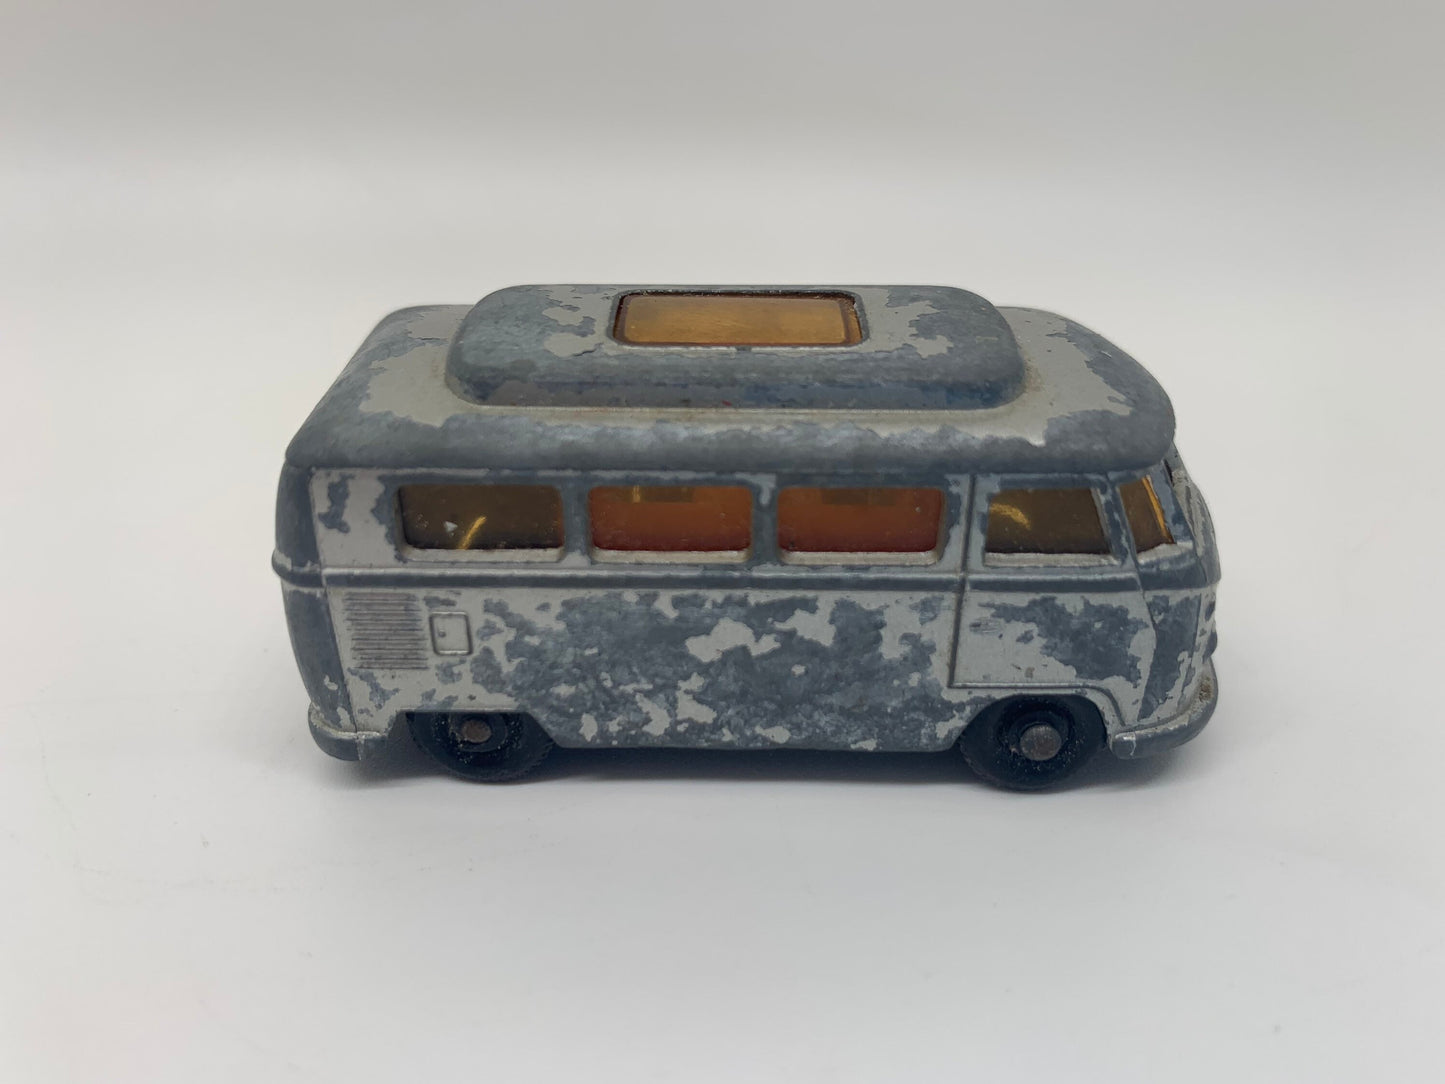 Matchbox 1967 Volkswagen Camper 34-C Grey Collectable Miniature Scale Model Toy Car Perfect Birthday Gift